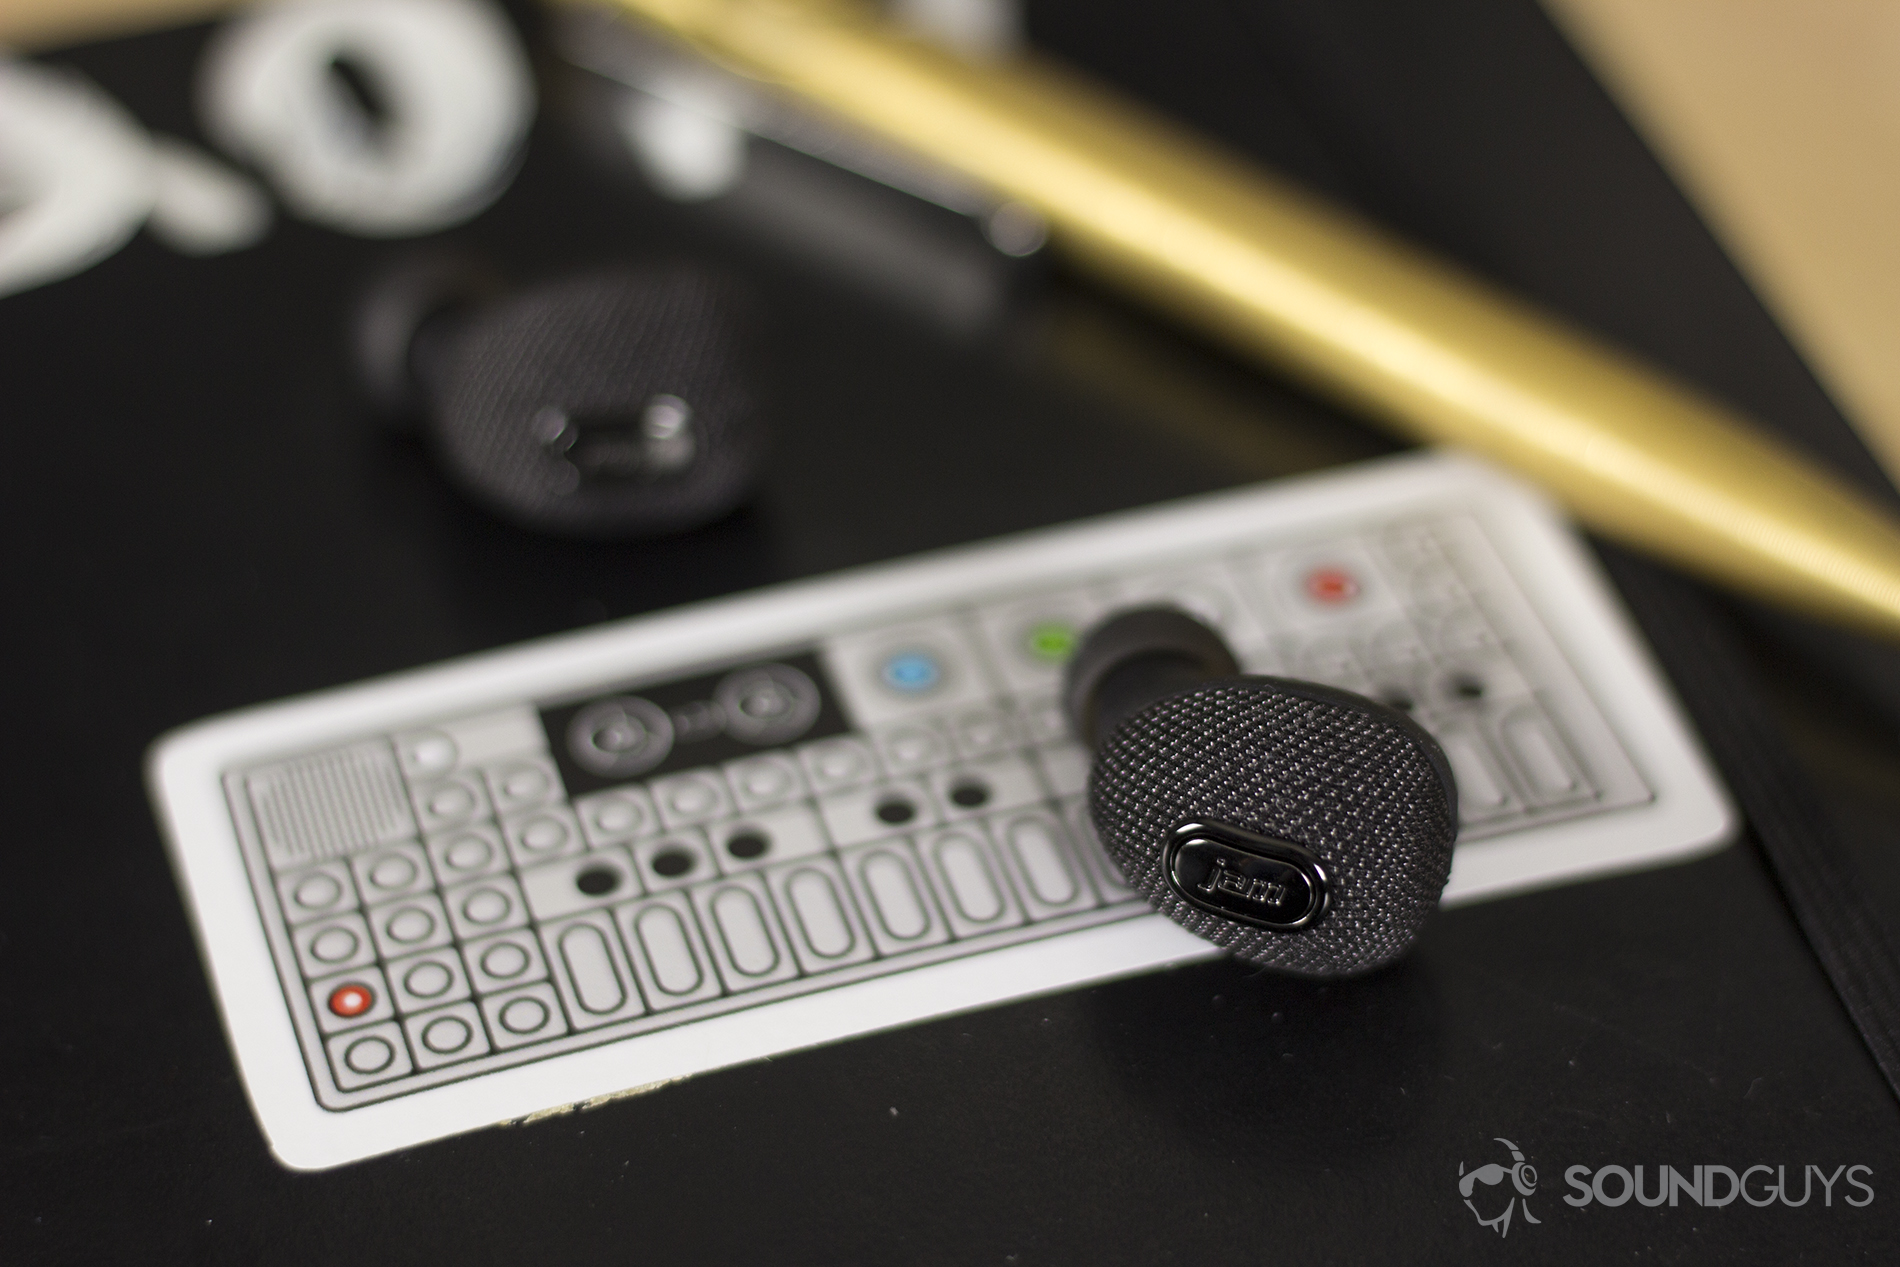 The Jam Ultra earbuds feature one button to control playback. If you want to adjust volume, you'll have to reach for your phone. Pictured: The Jam Ultra earbuds on a sticker for a backdrop. In the background is a gold pen on a black surface.